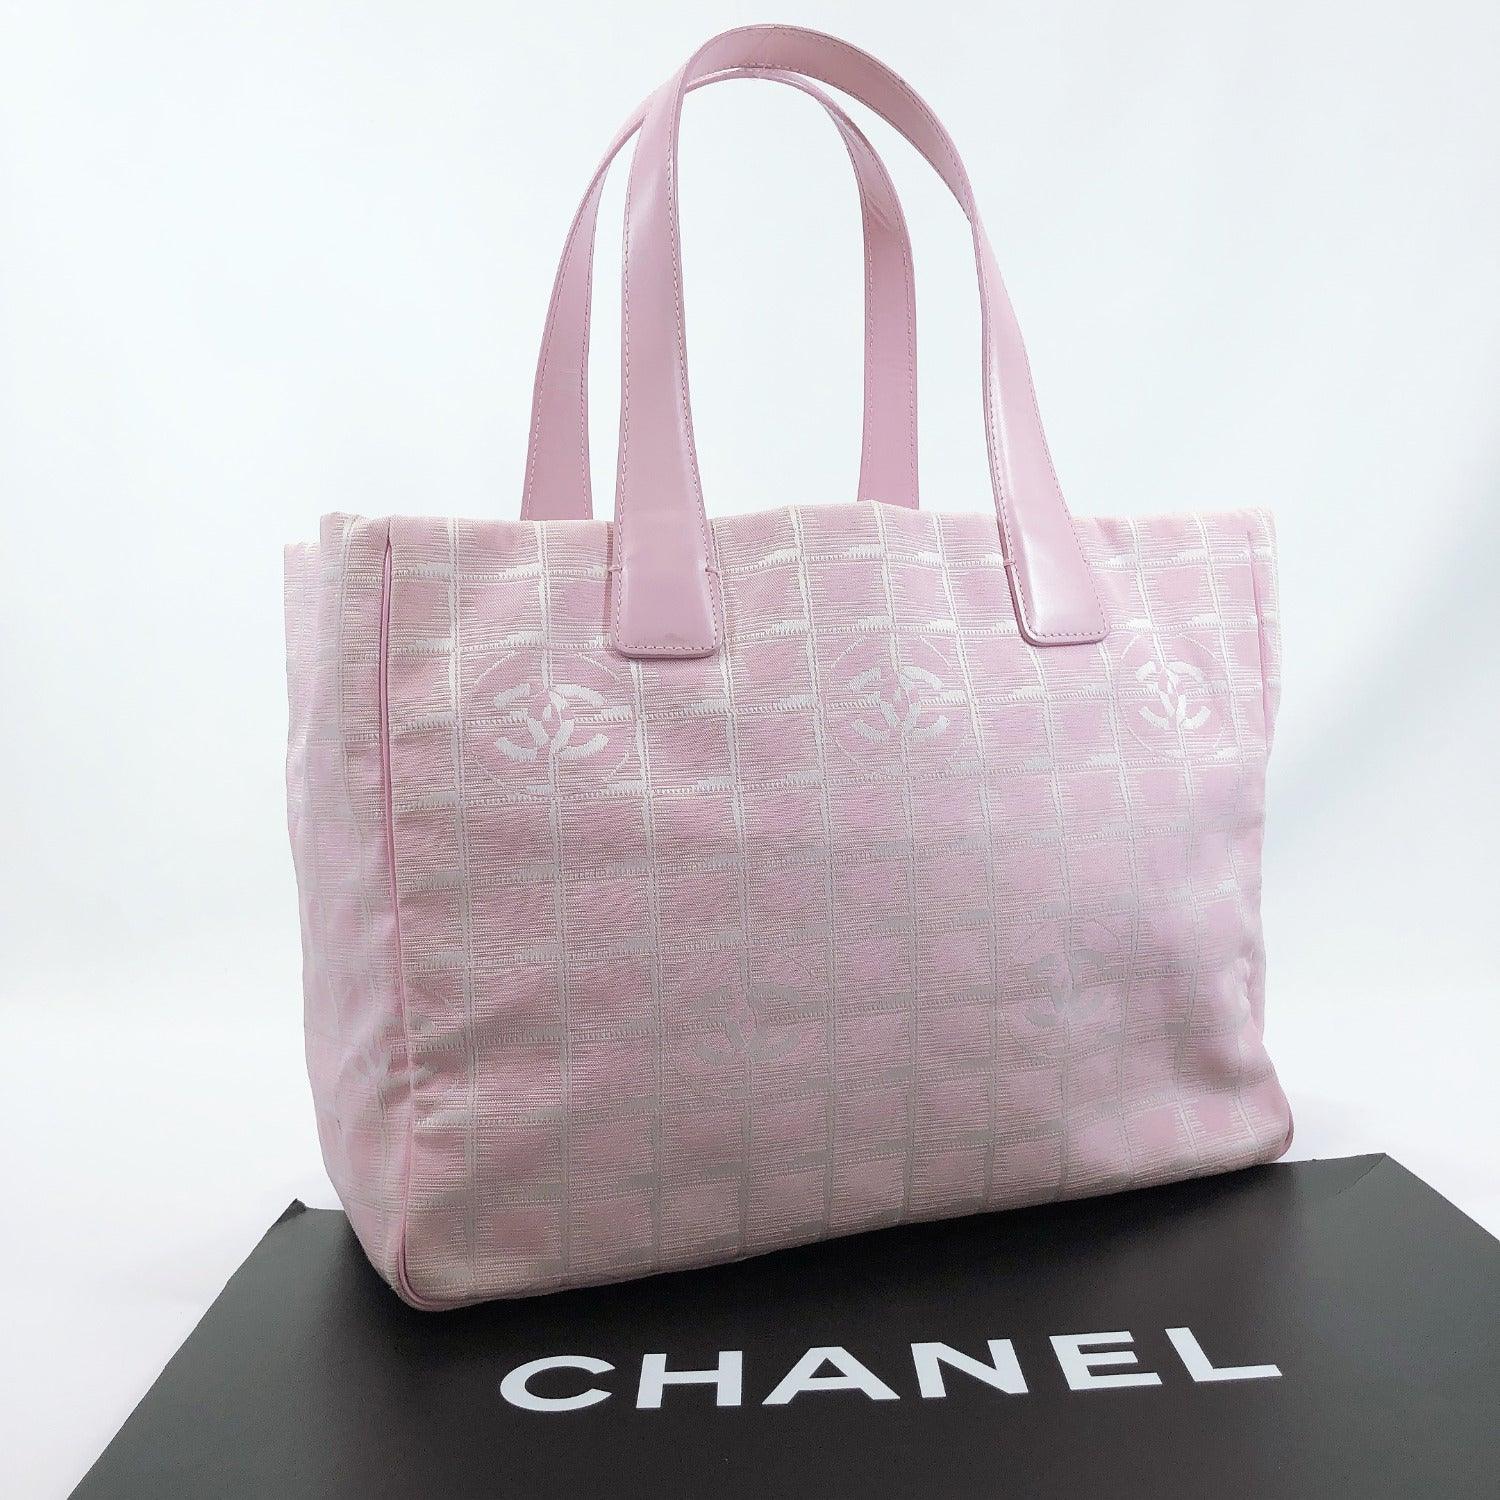 CHANEL Travel Line Bags, Authenticity Guaranteed